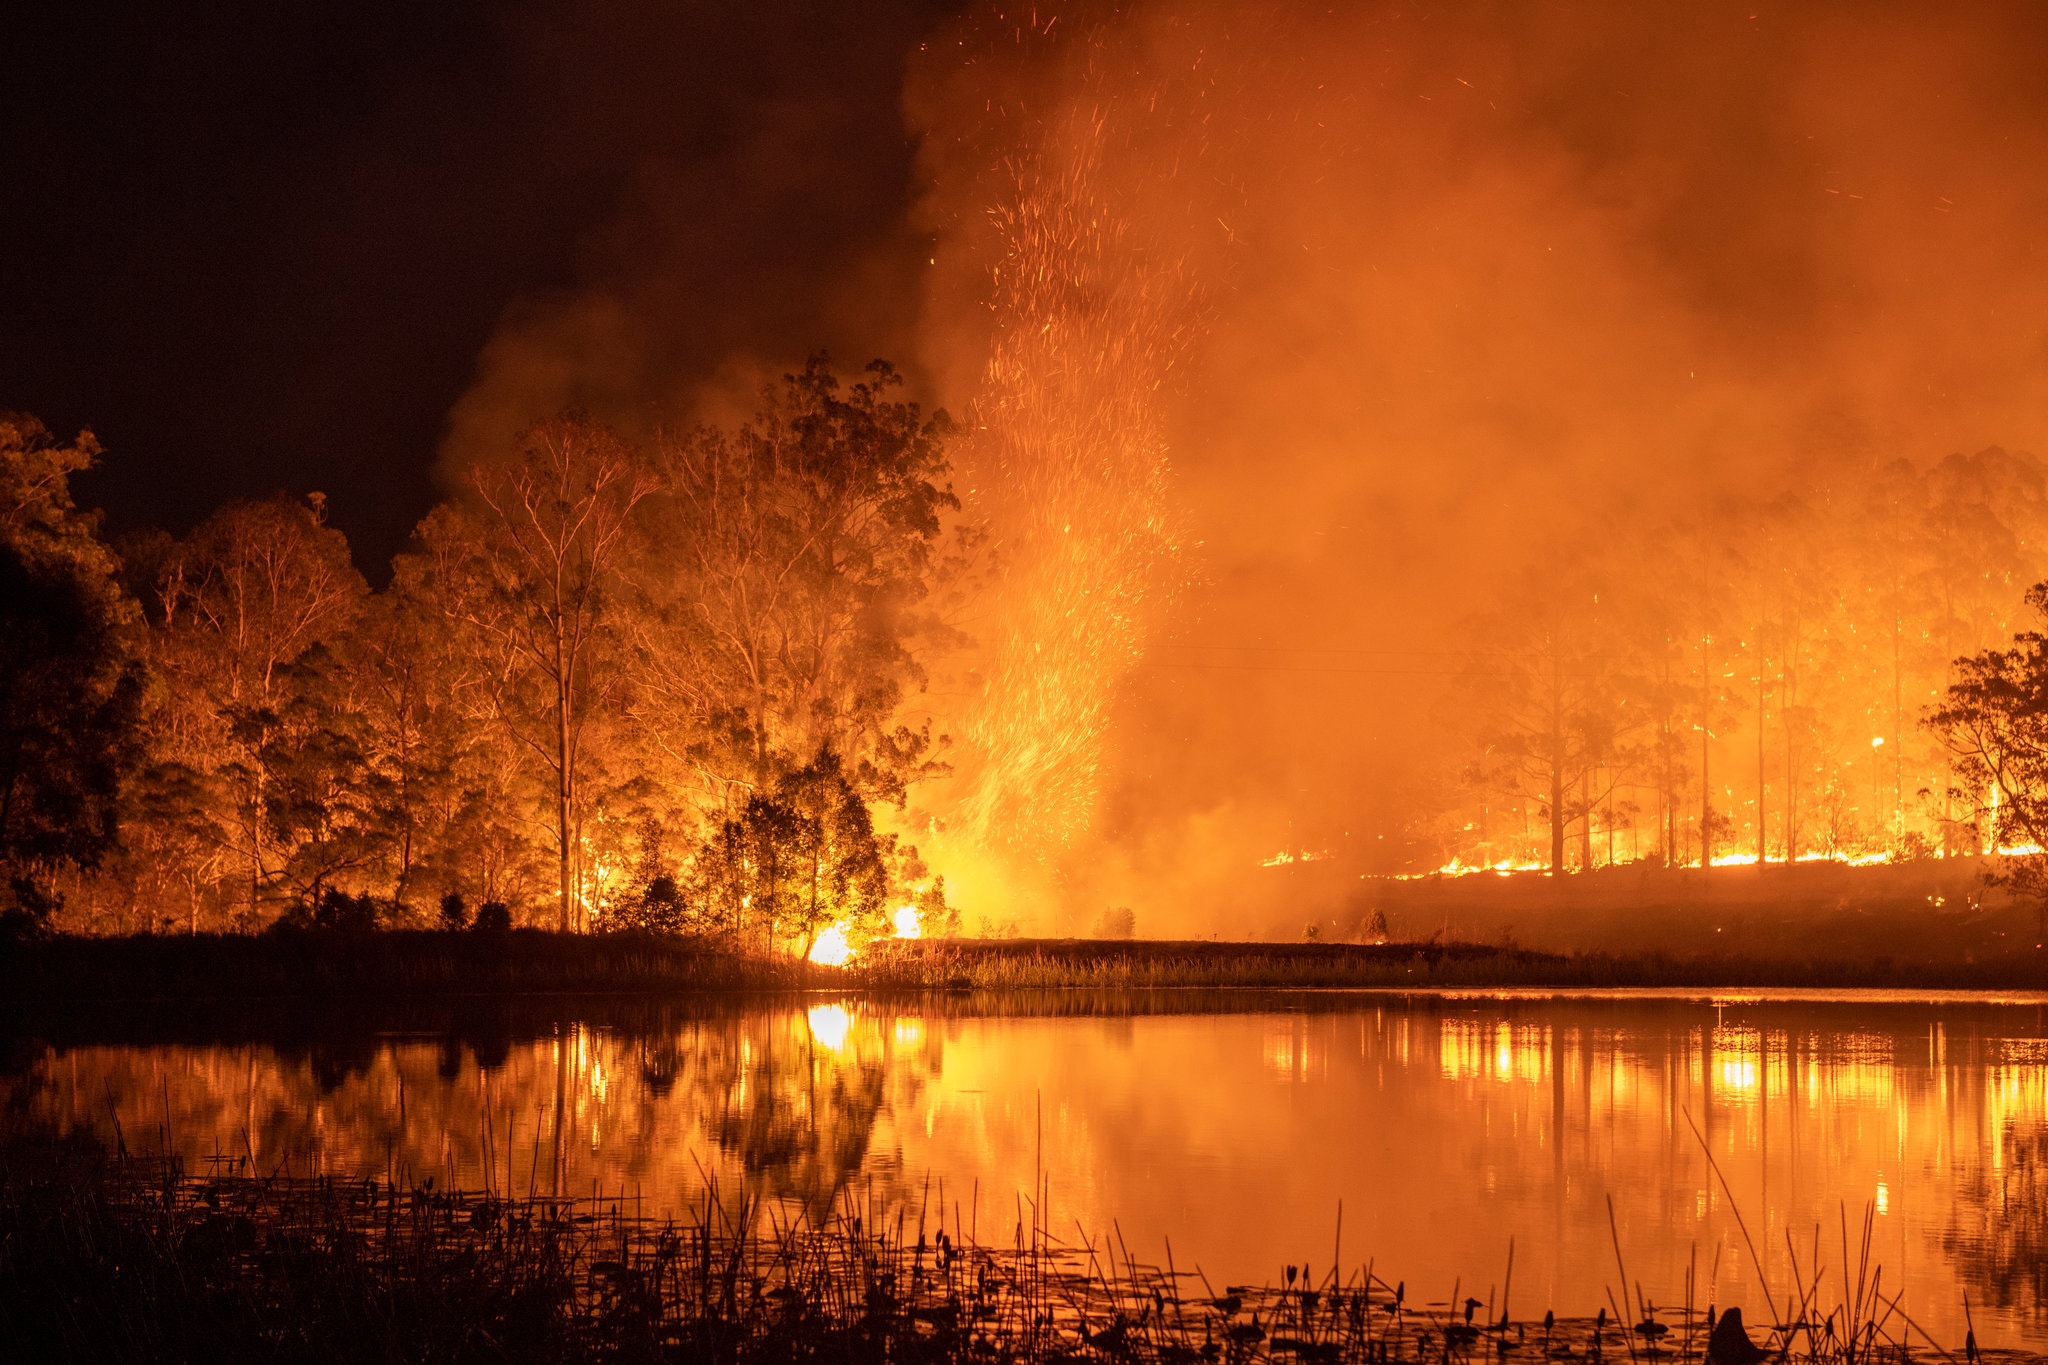 trees and water illuminated by wildfire in New South Wales